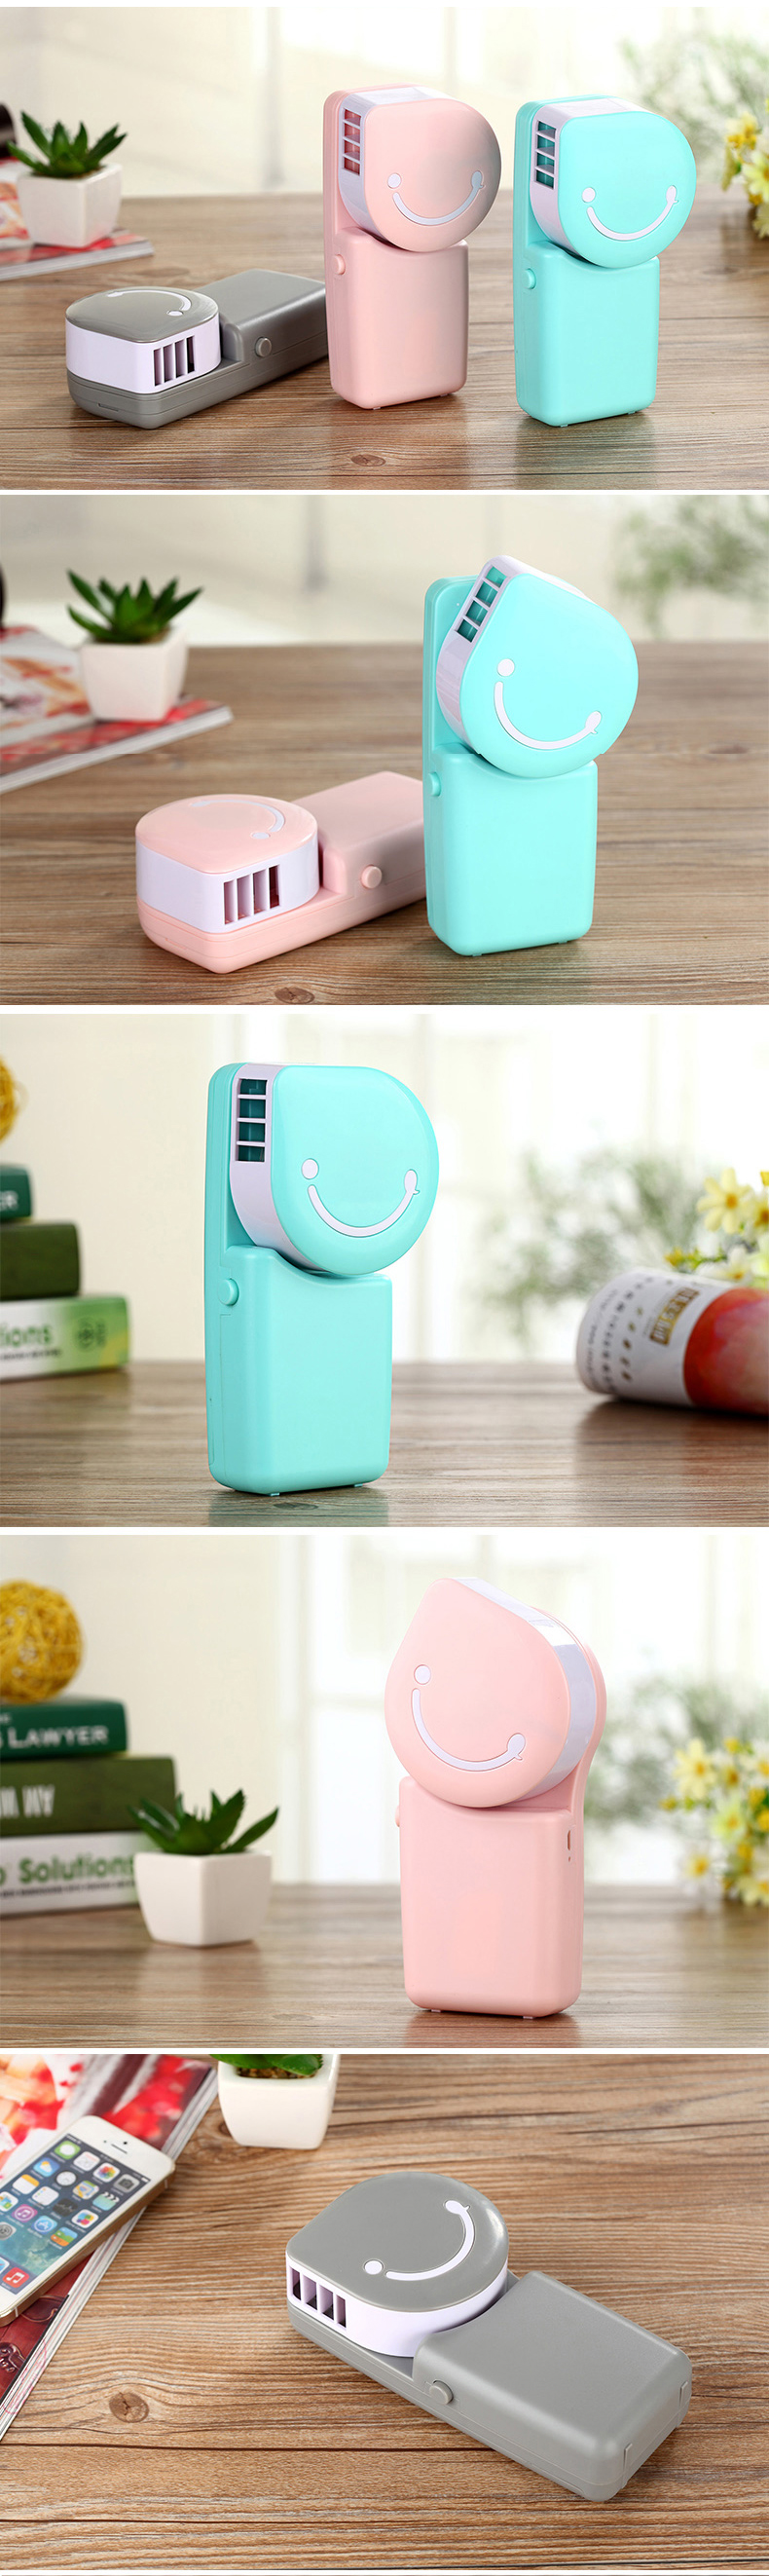 Loskii LX-882 Summer Mini Fan Cooling Portable Air Conditioning USB Charge Hand-held Cool Fan 80